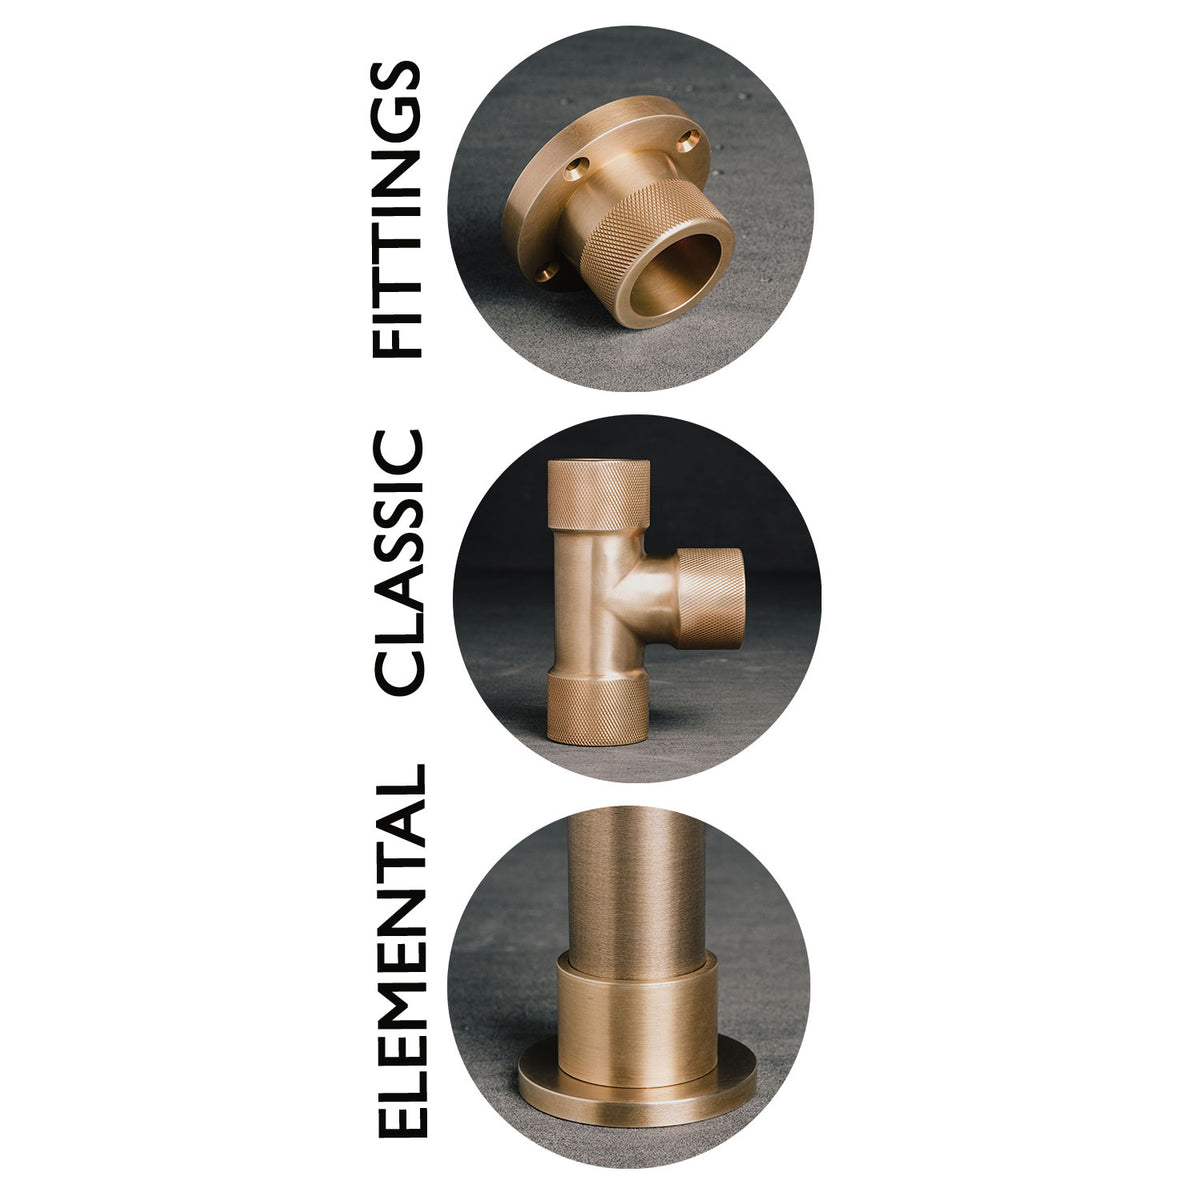 Details of aged brass Elemental Classic fittings image 3 of 3